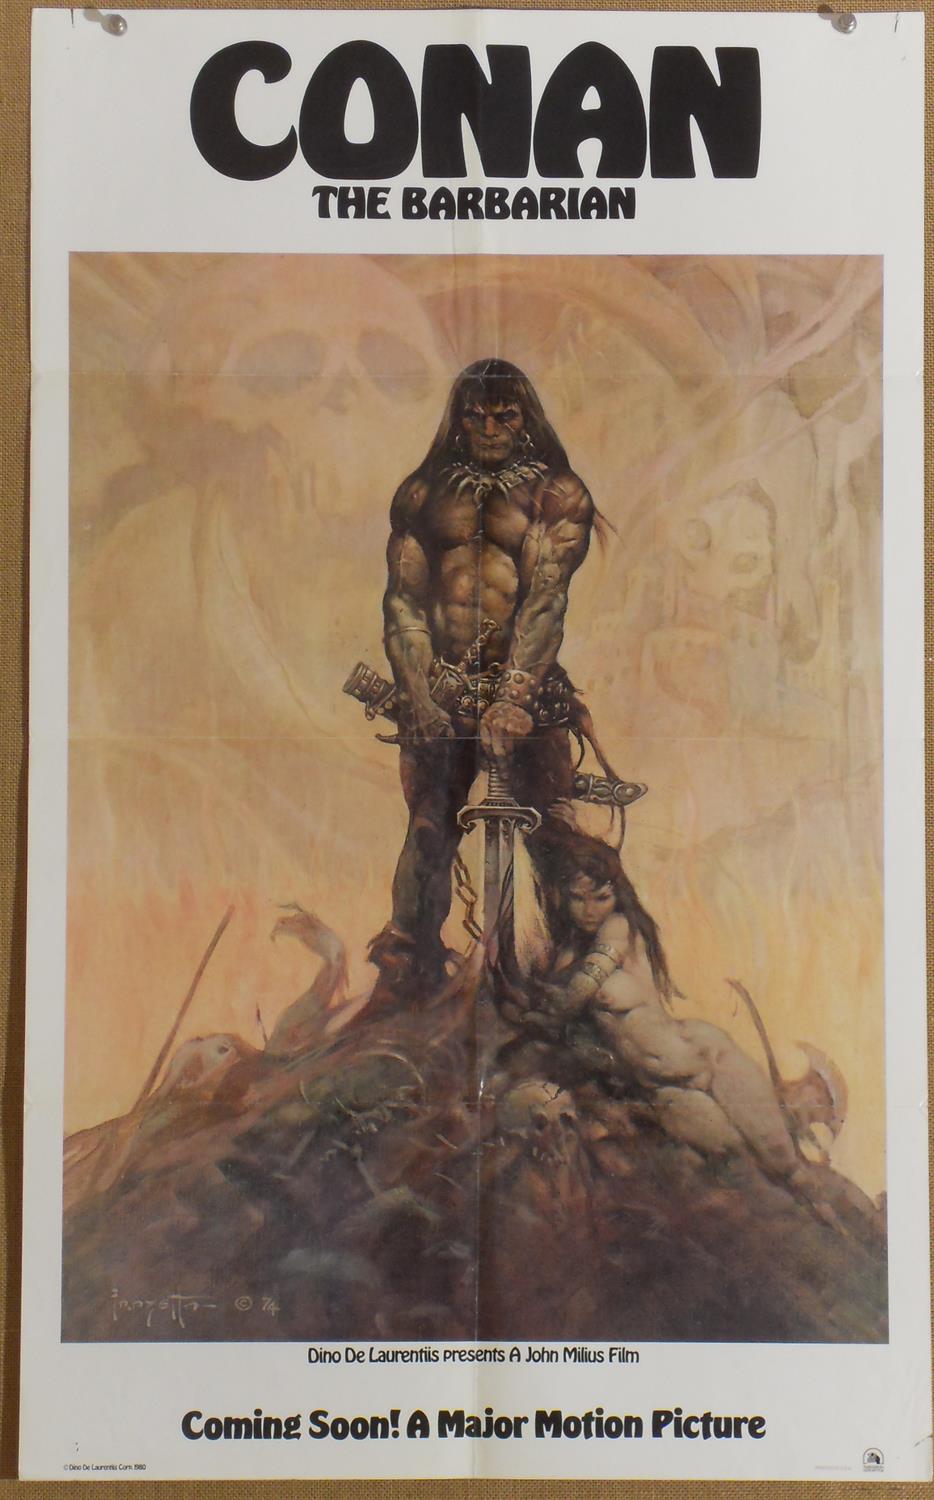 Conan the Barbarian (1982) Advance US film poster, artwork by Frank Frazetta, rolled,